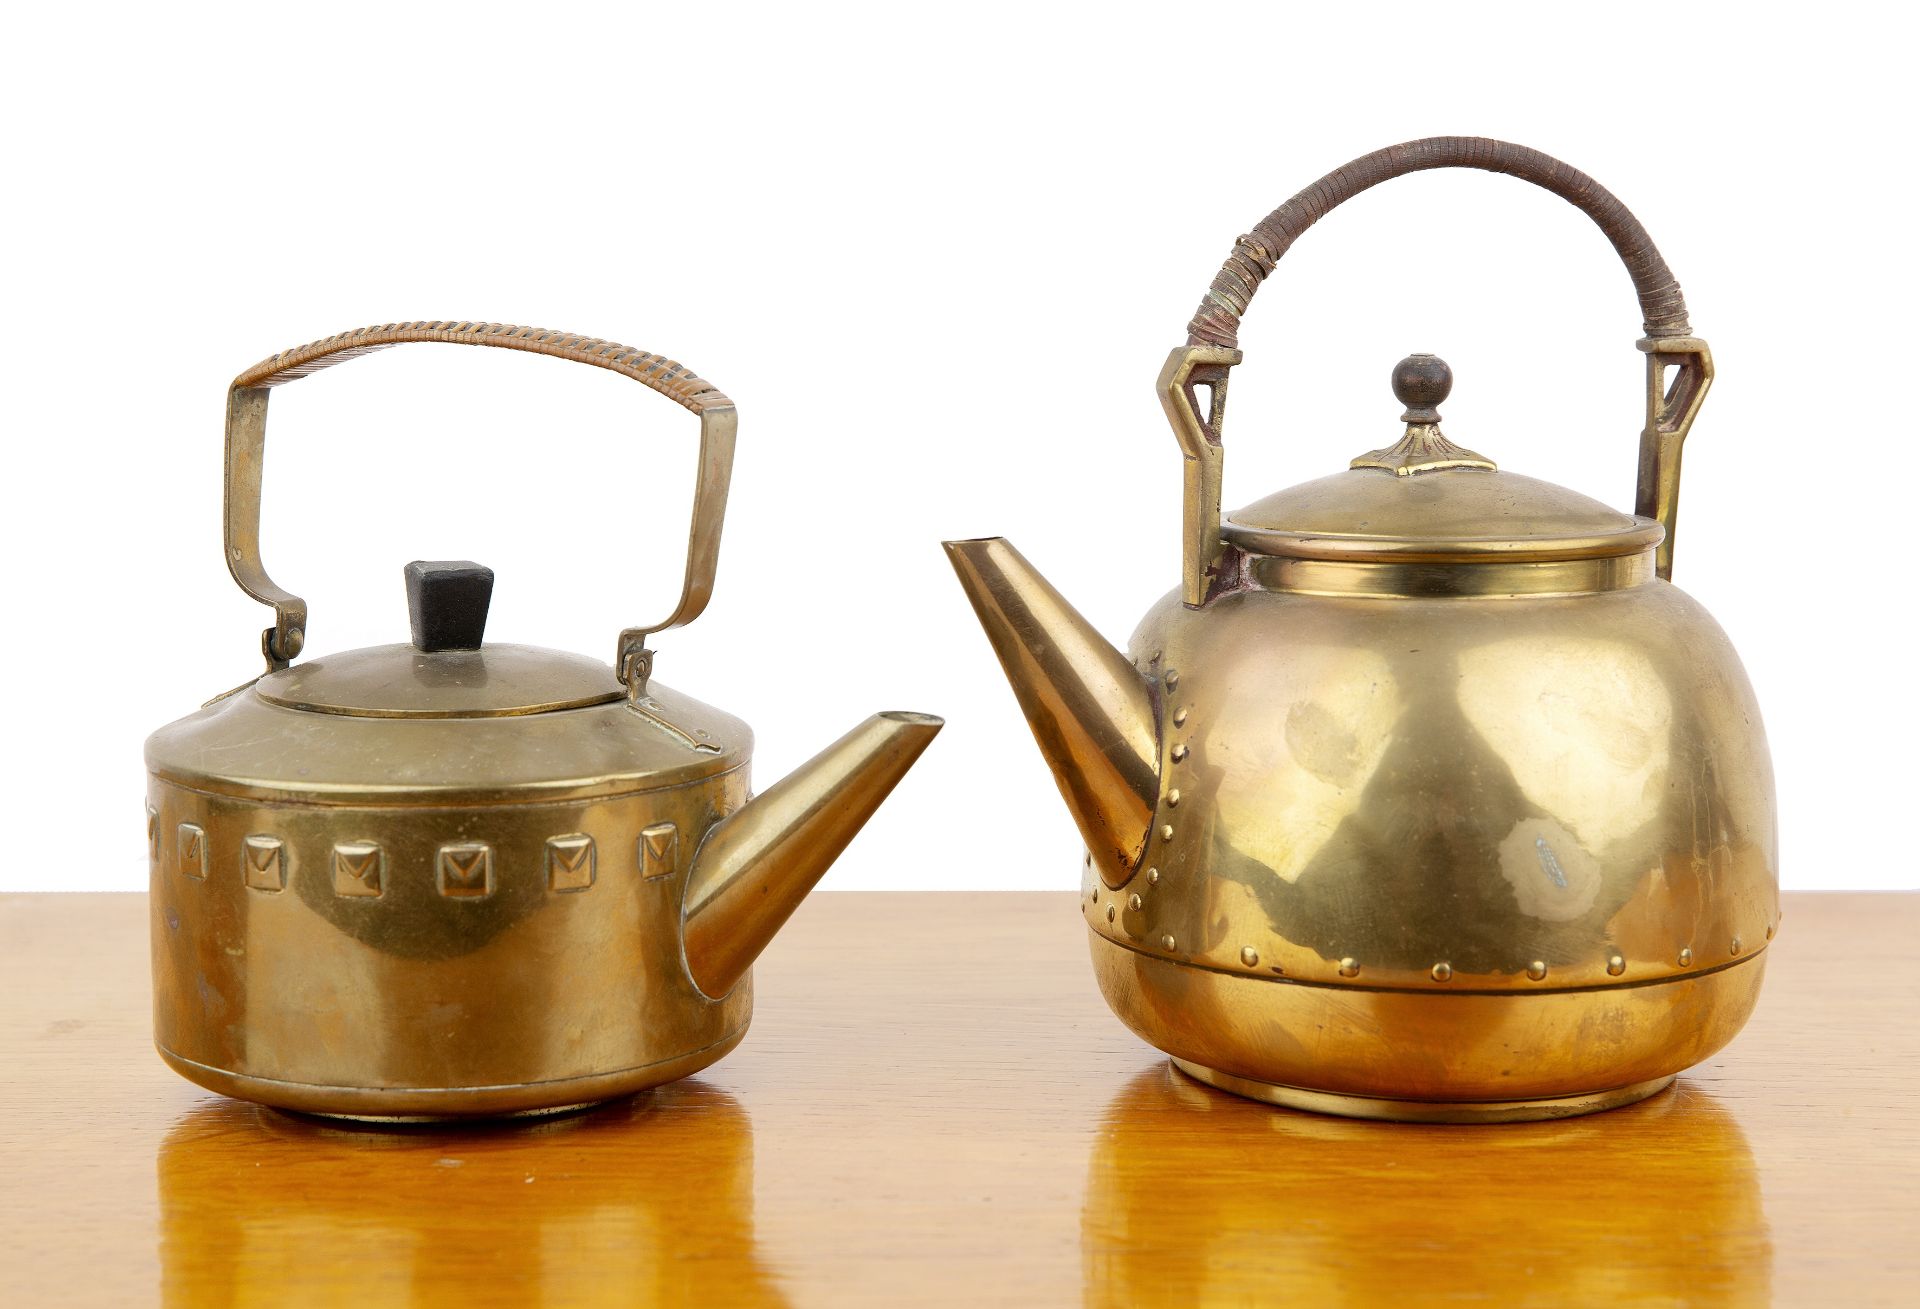 In the manner of WMF (Württembergische Machin Fabrik) two Secessionist style brass kettles or